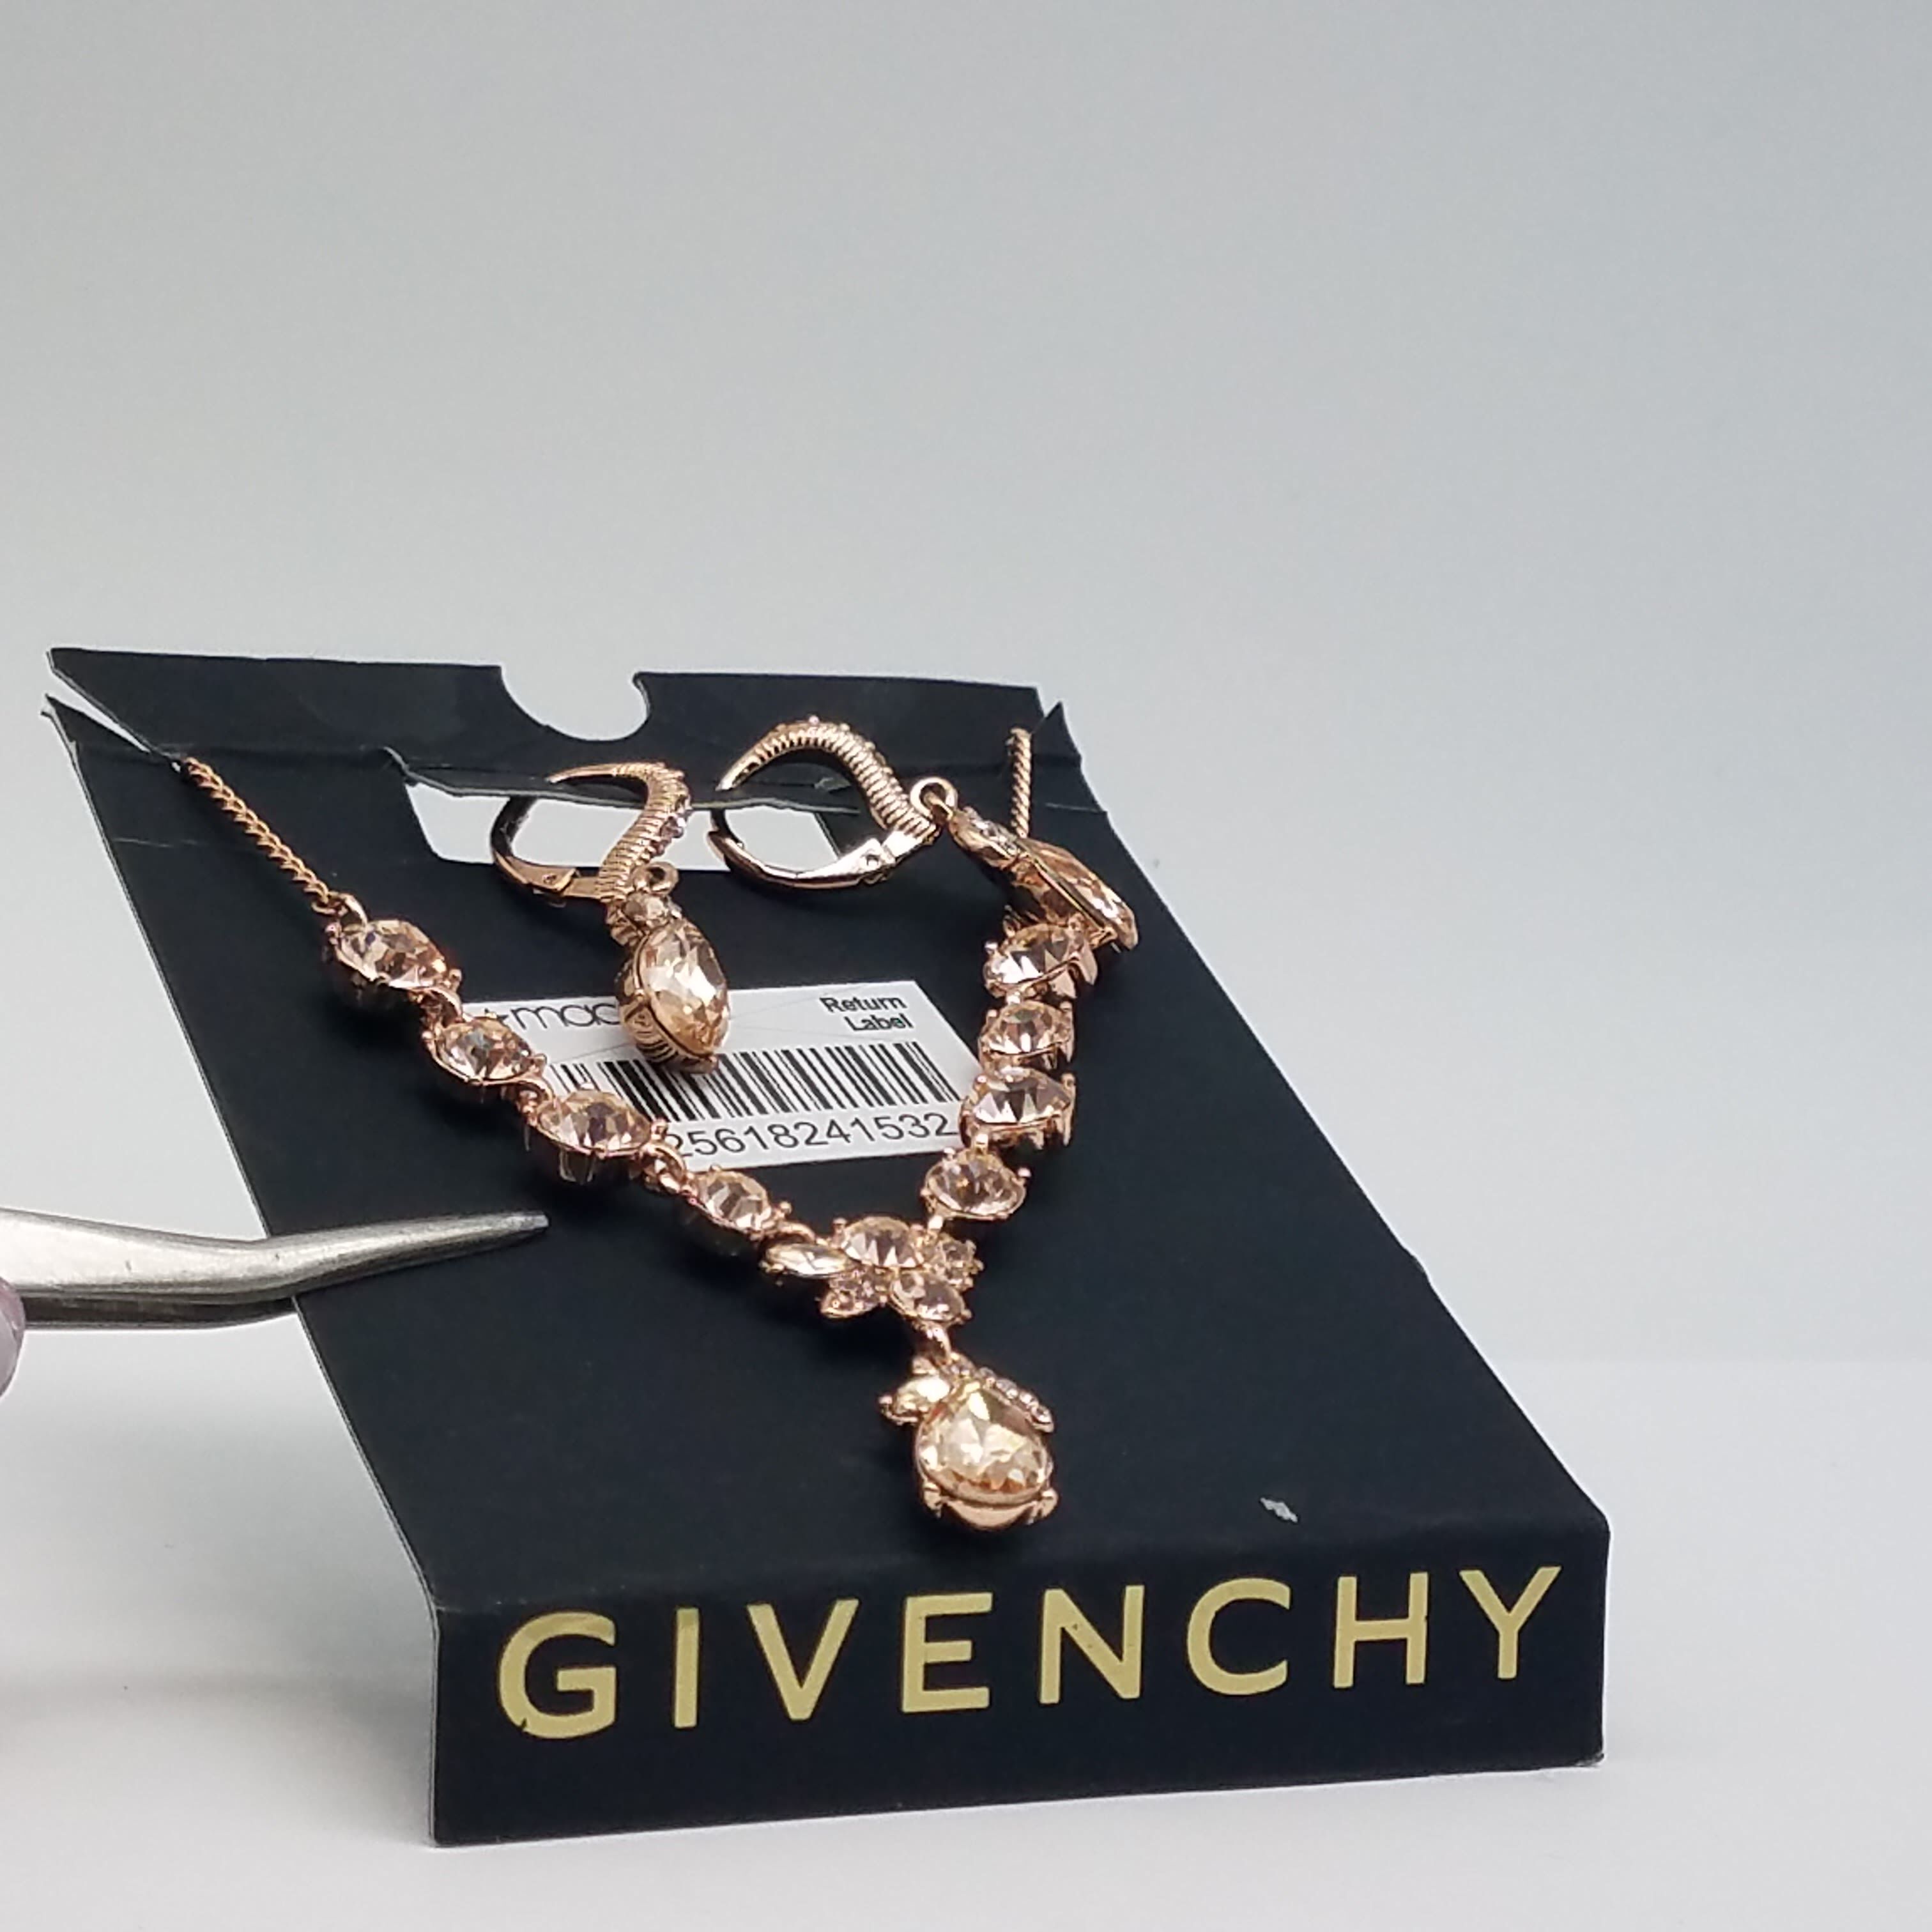 Shop GIVENCHY Unisex Metal Necklaces & Chokers by BlueAngel | BUYMA